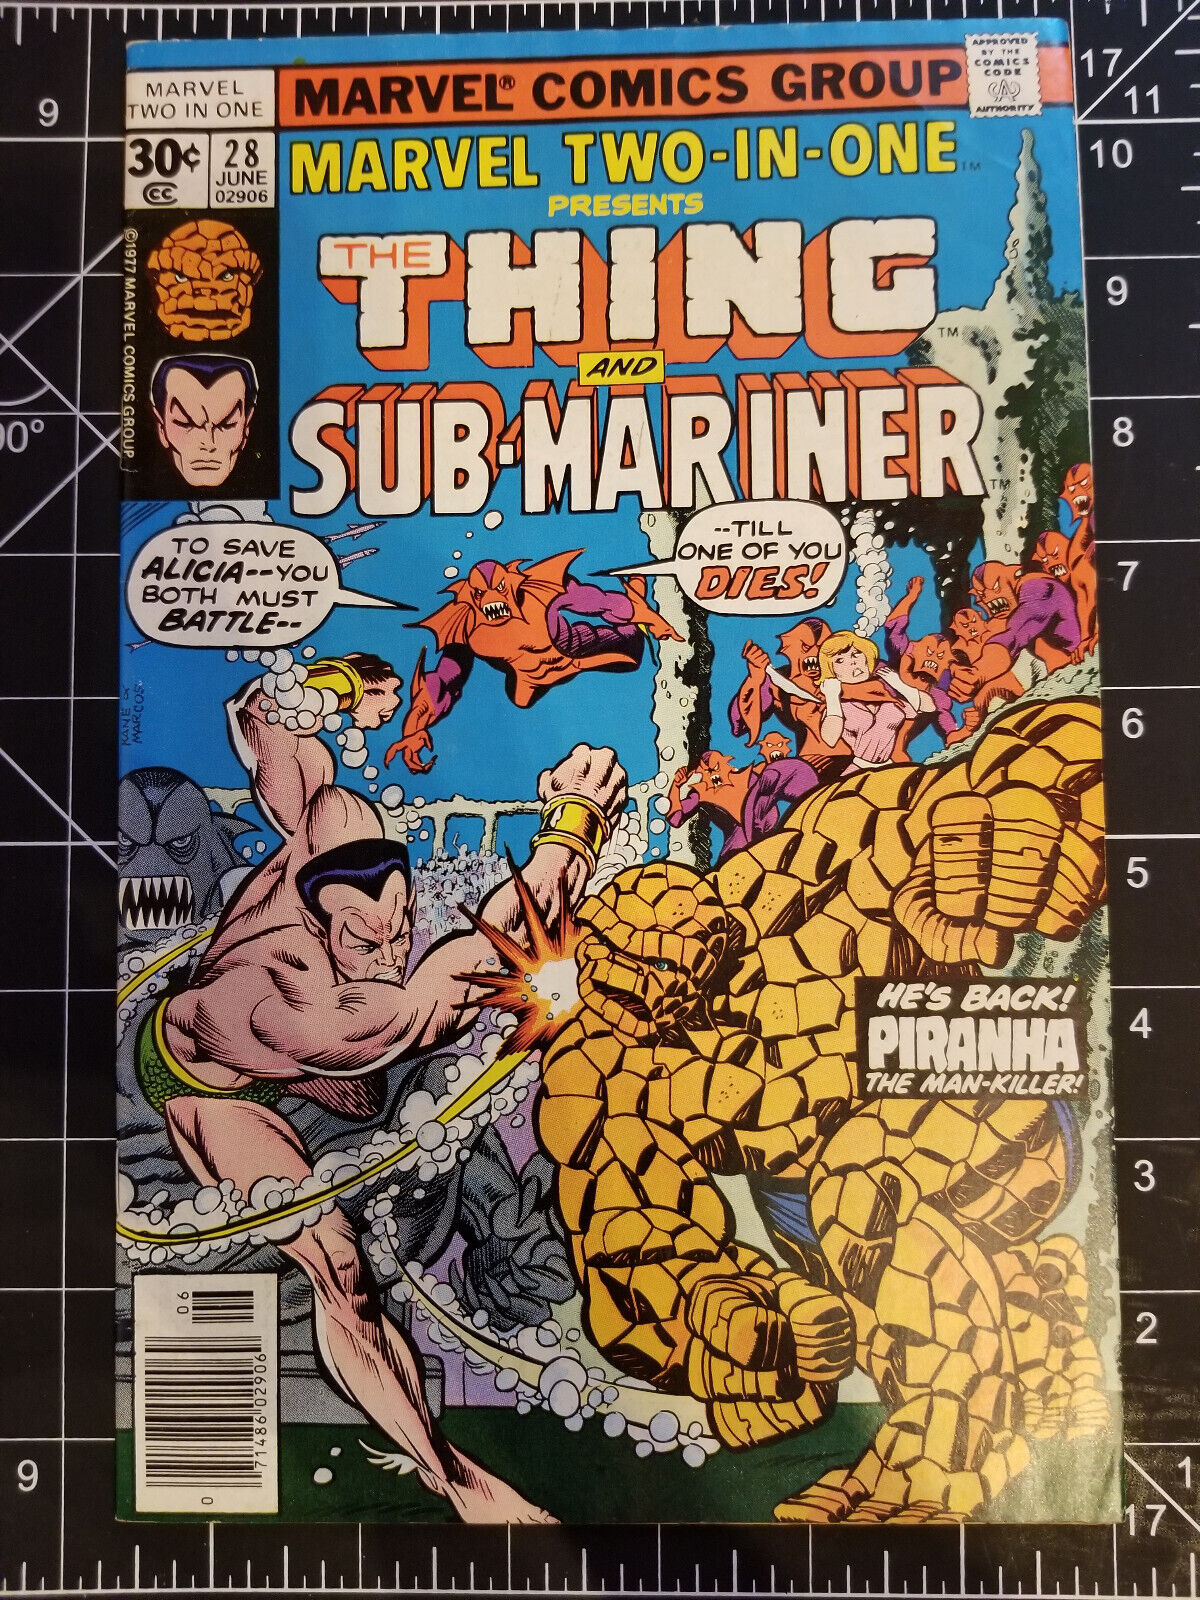 Marvel Two-In-One  #28 (Marvel Comics 1977) Sub-Mariner, The Thing